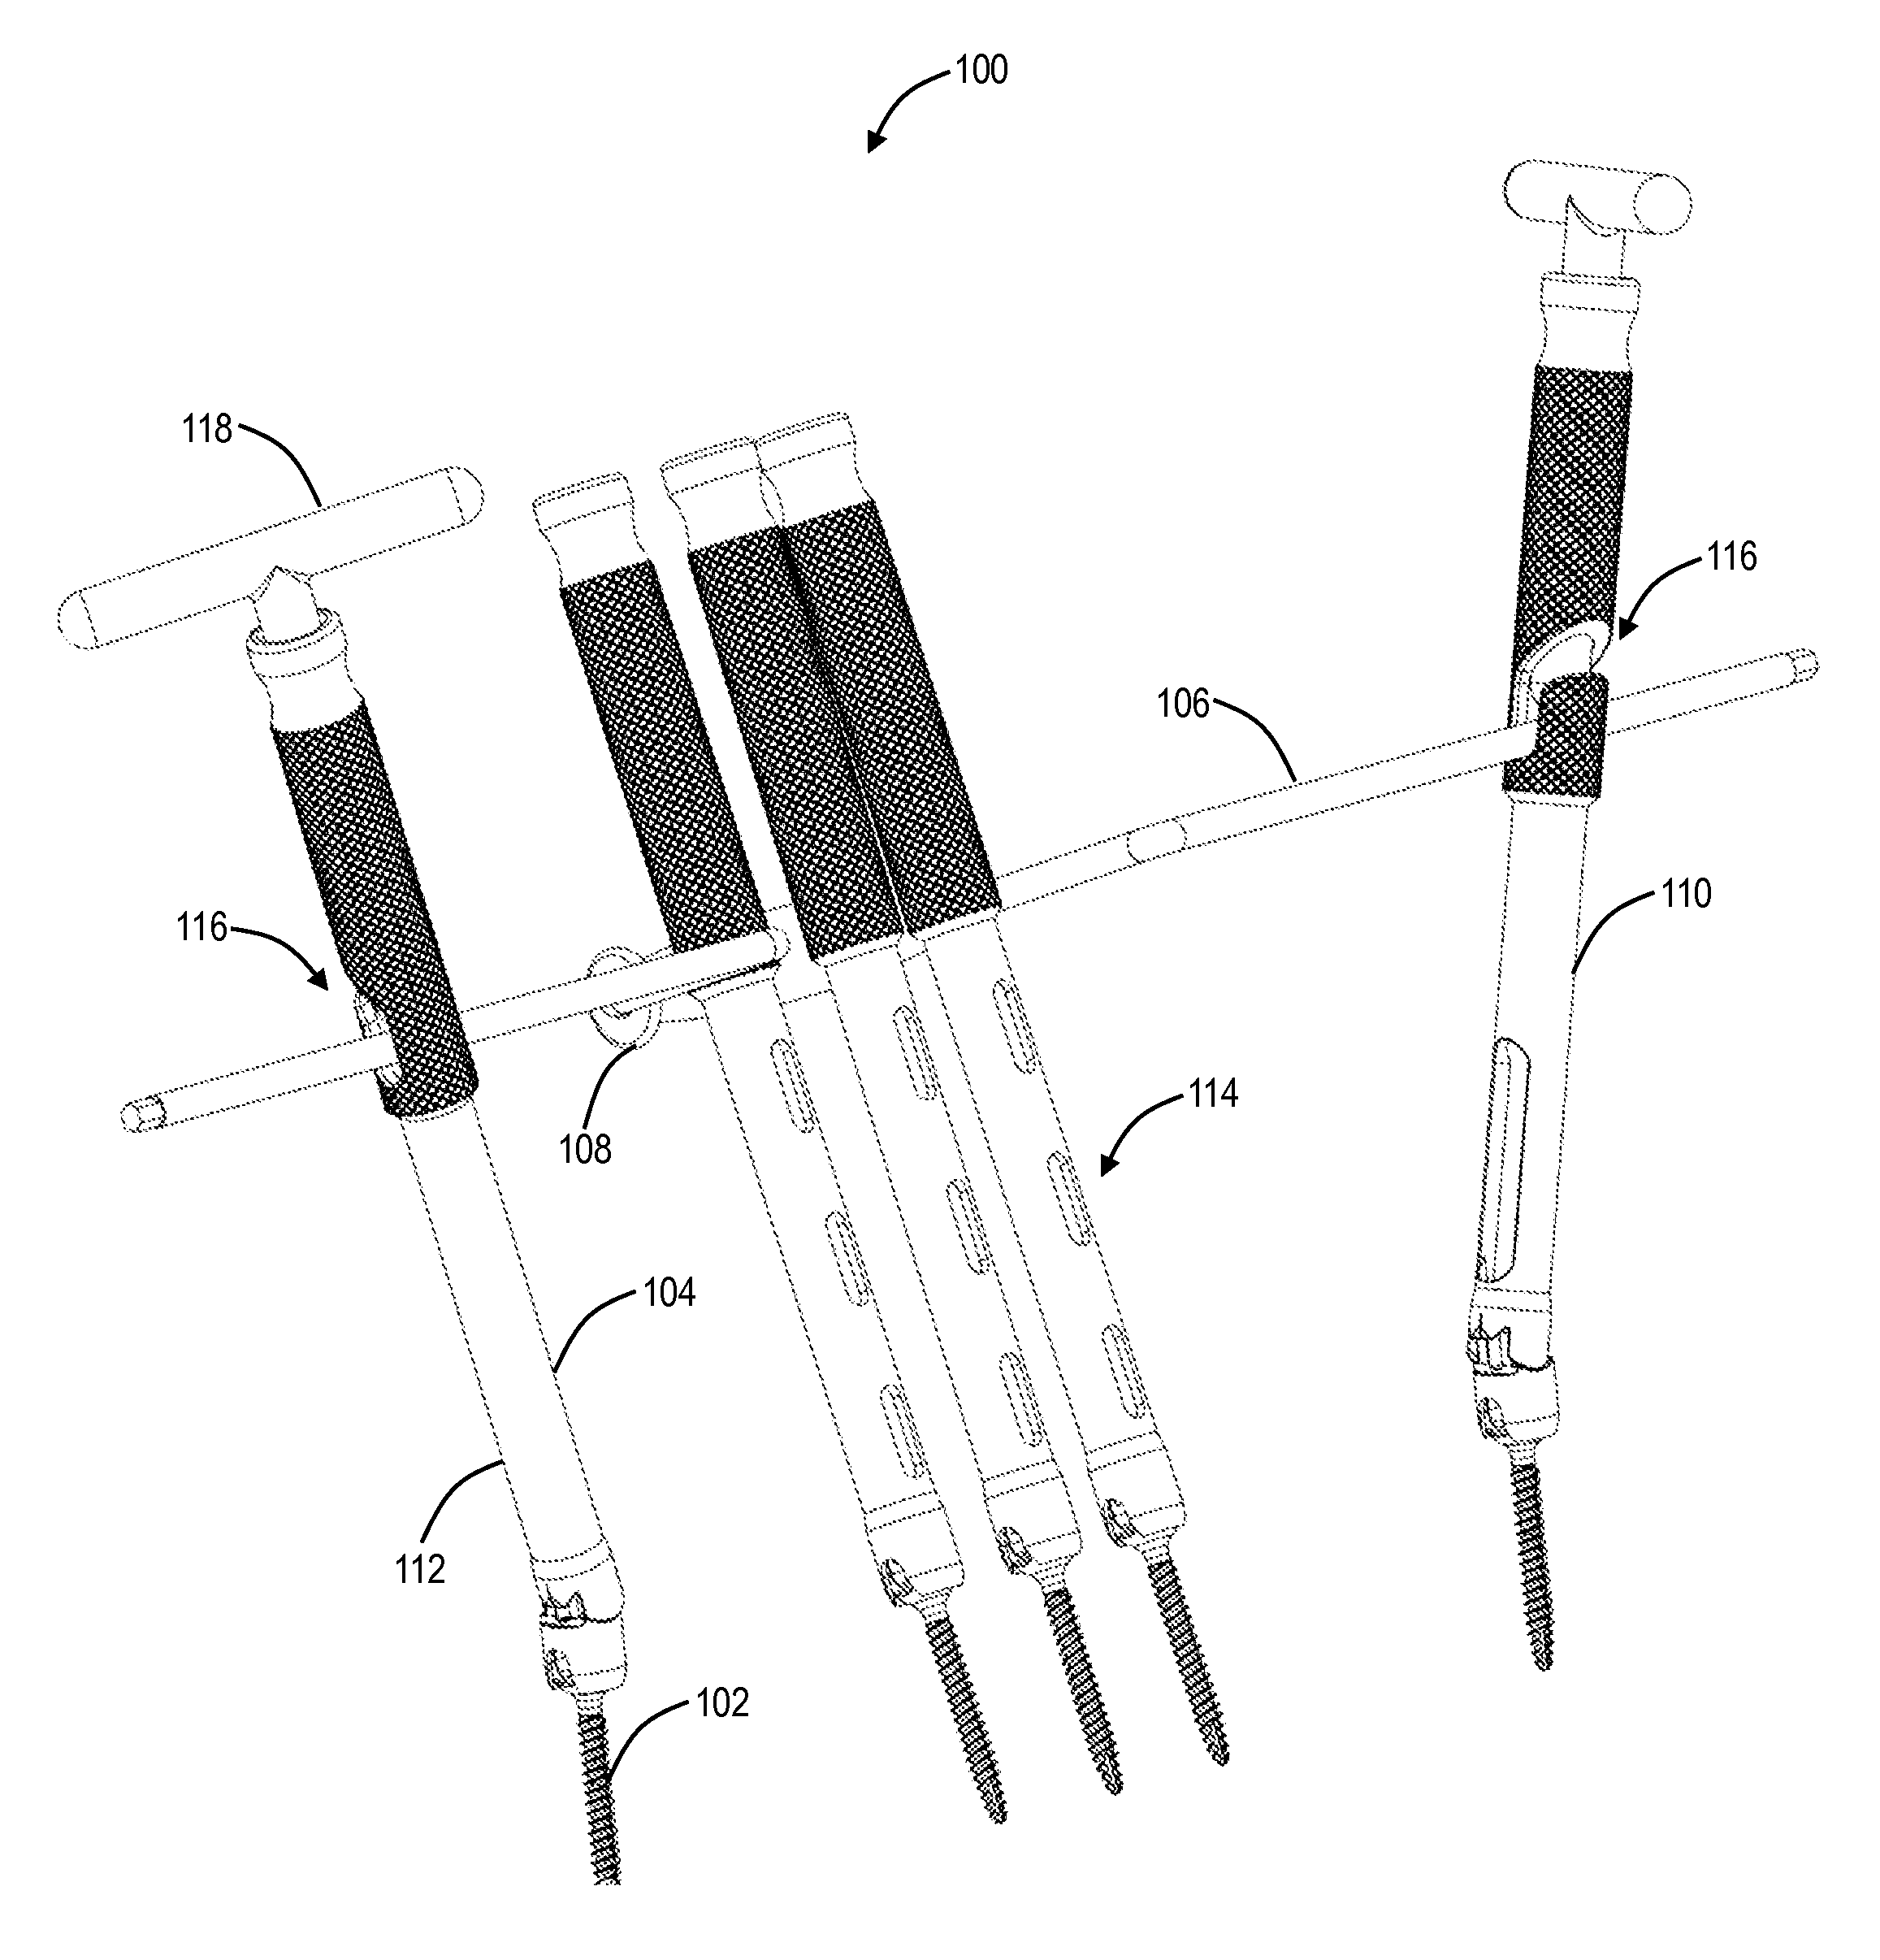 System and method for spinal deformity correction